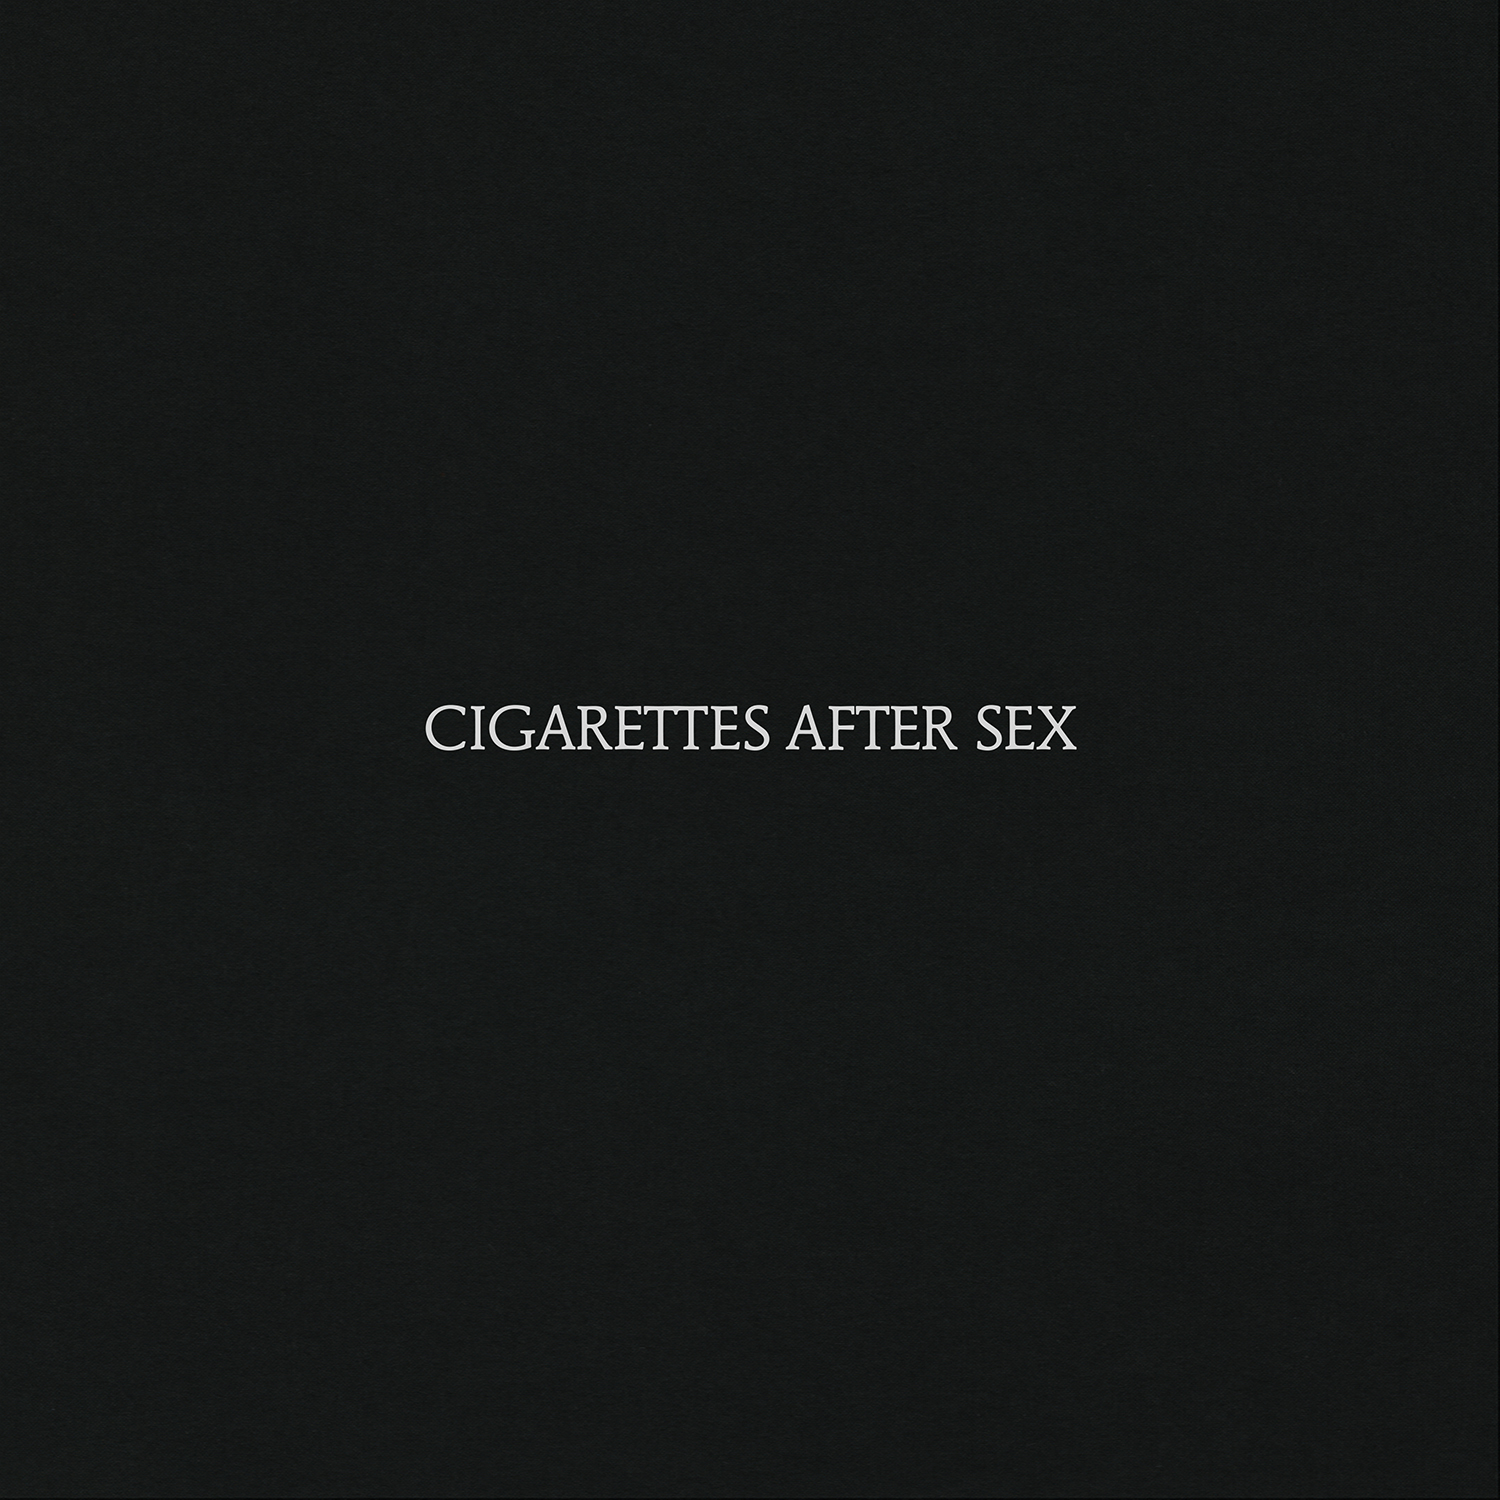 Cigarettes After Sex adds more momentum to shoegaze revival